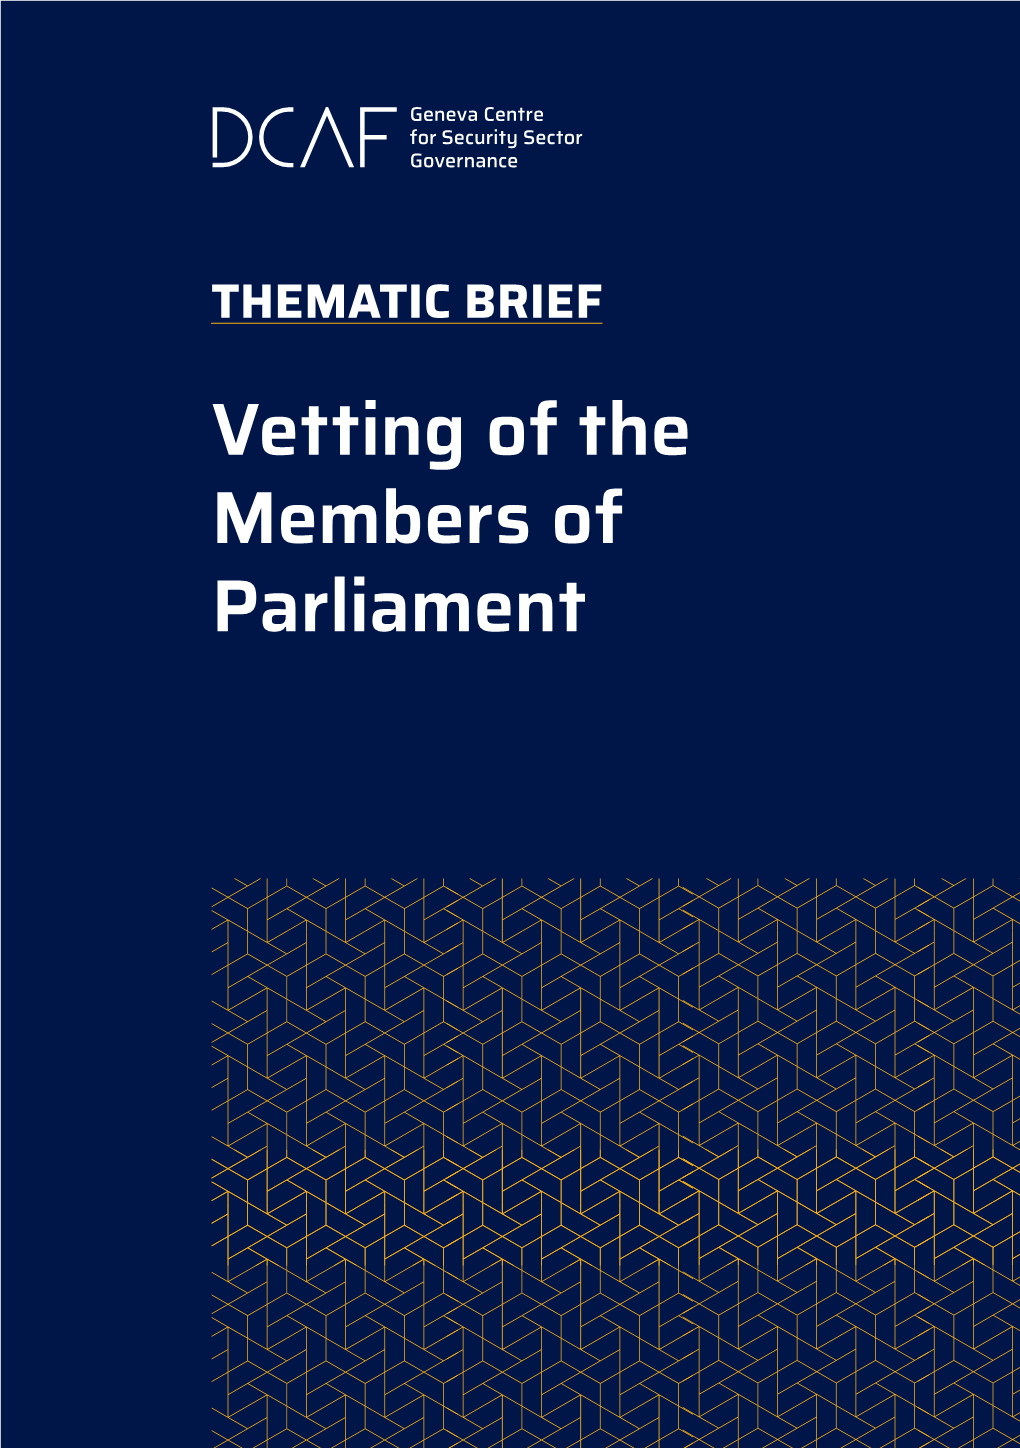 Vetting of the Members of Parliament